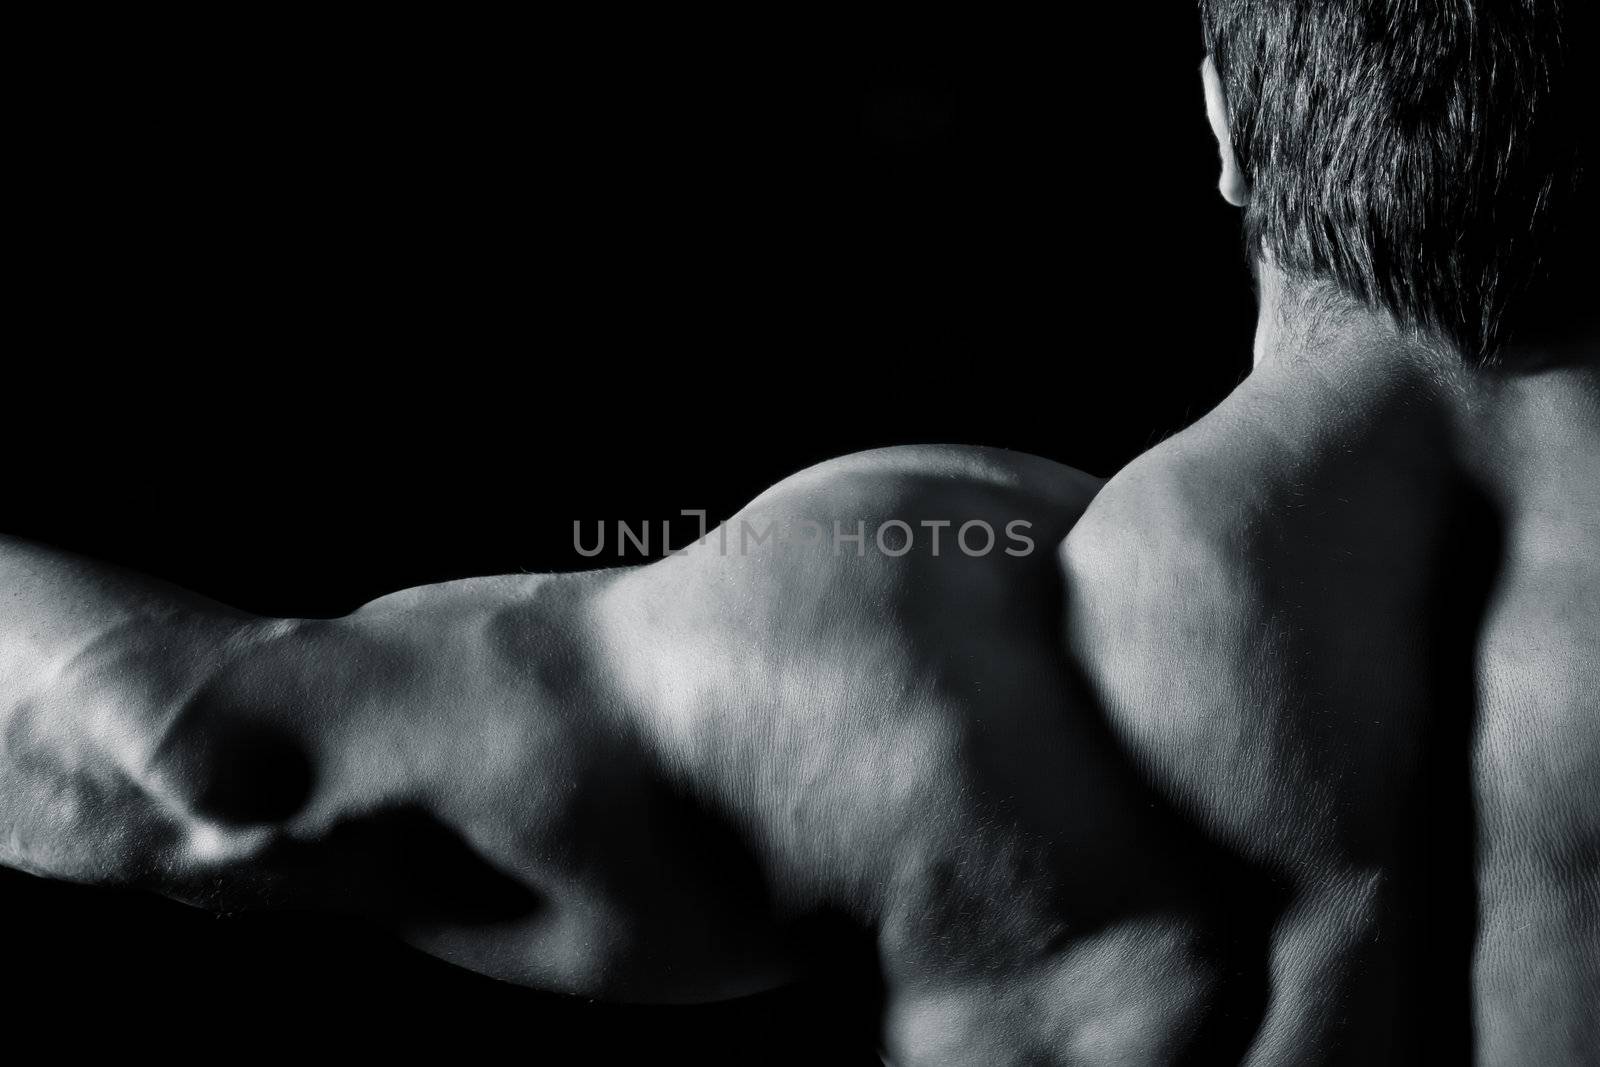 An image of a muscular sports man back